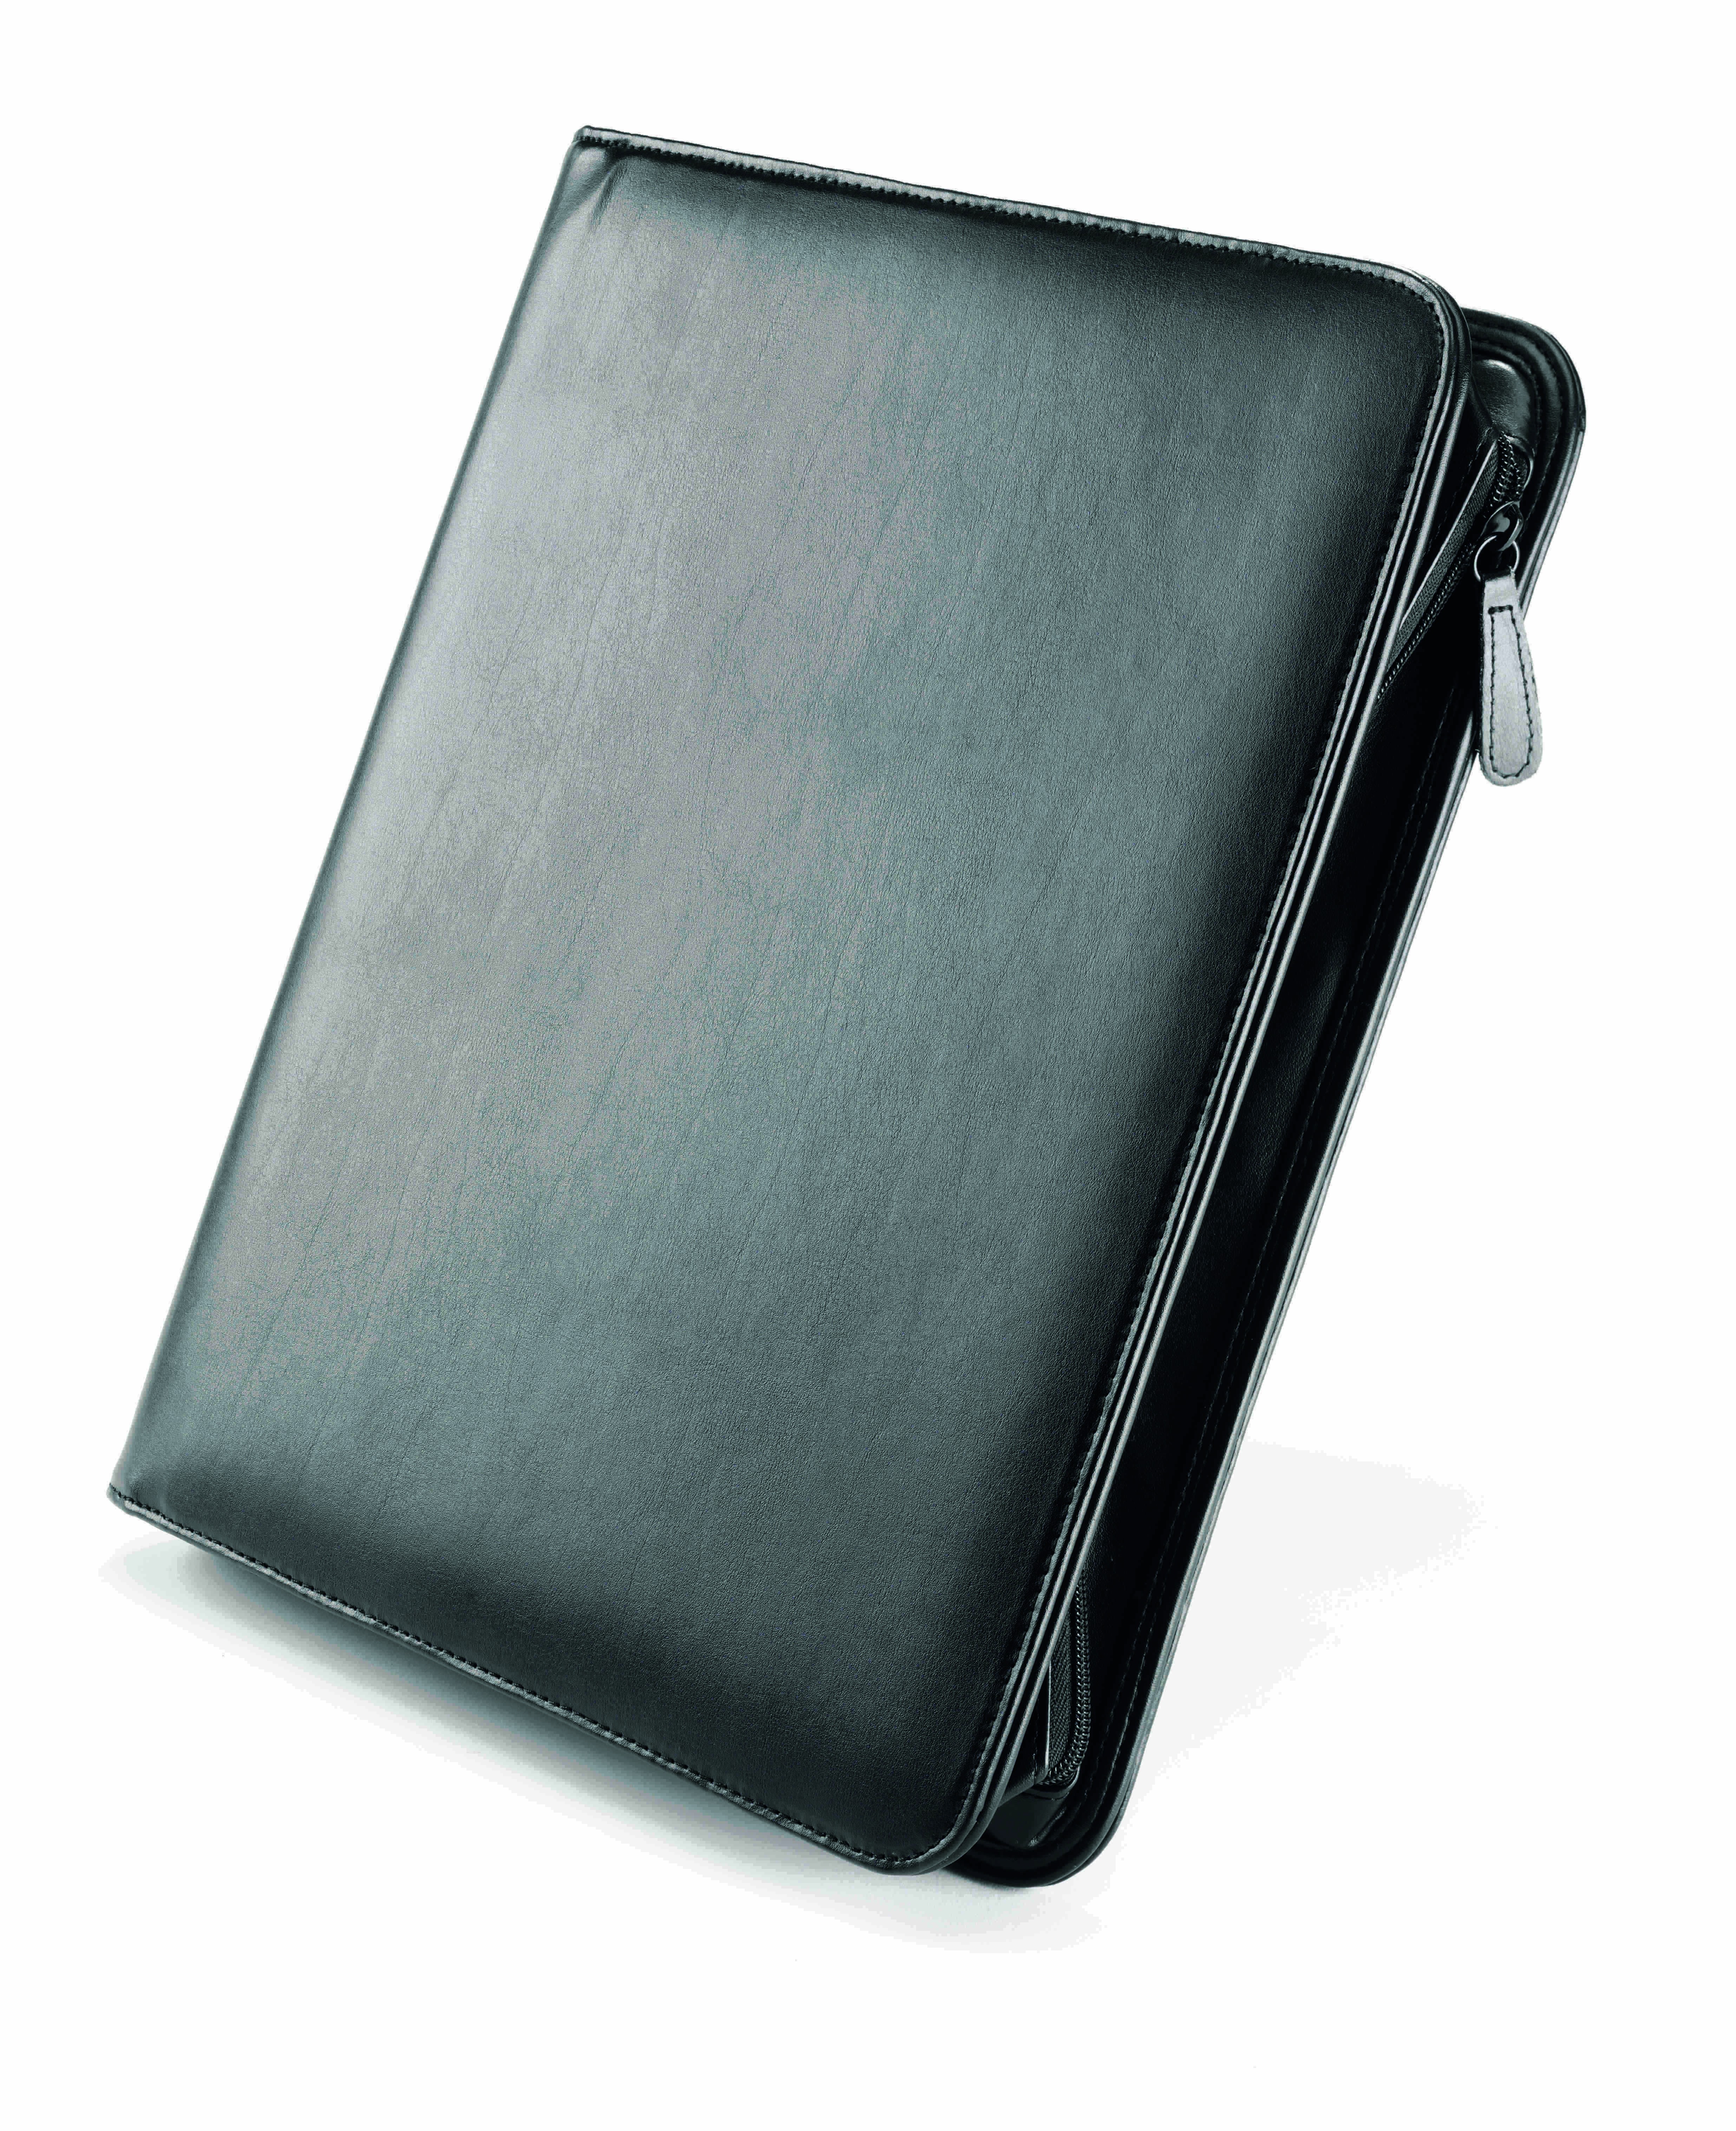 Falcon A4 Leather iPad/Tablet Zip Close 4 Ring Binder Conference Folder - FI6518BL Black